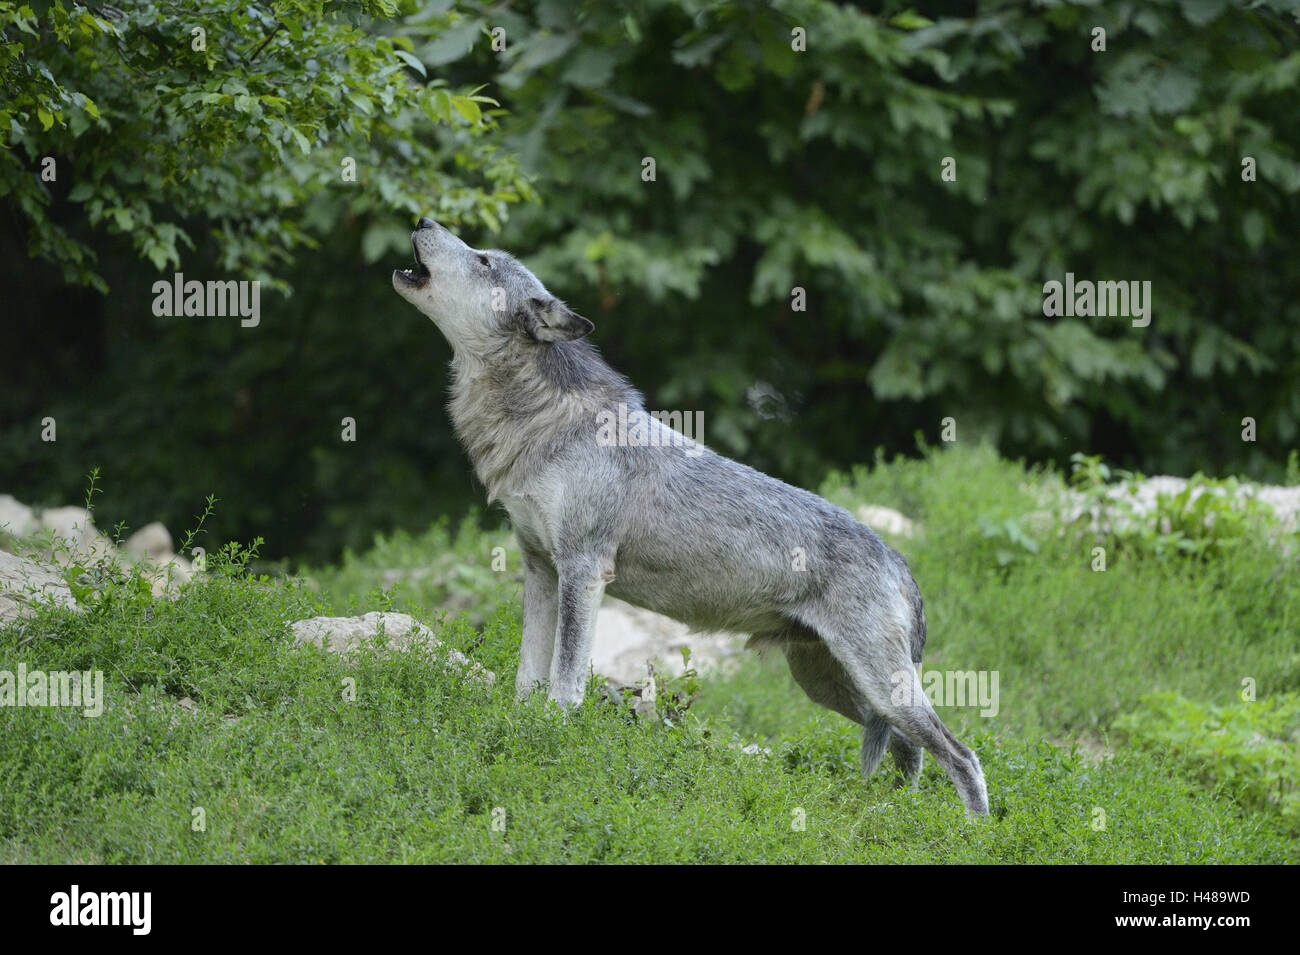 Eastern Timber Wolf, Canis lupus lycaon, meadow, debout, hurlements, vue latérale, Banque D'Images